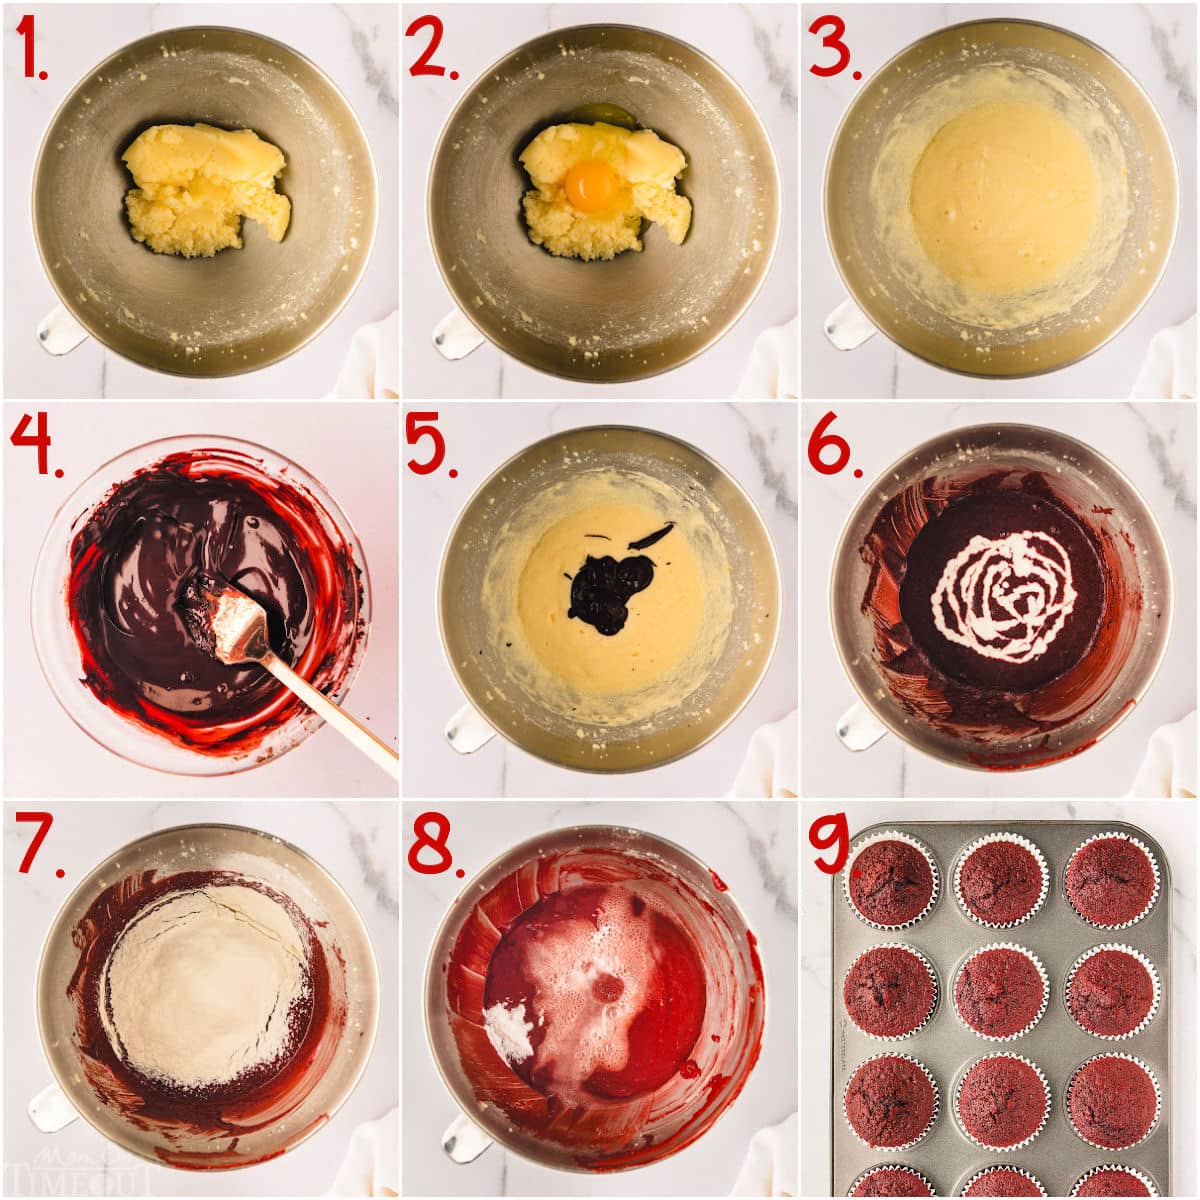 nine image collage showing how to make red velvet cupcakes step by step.